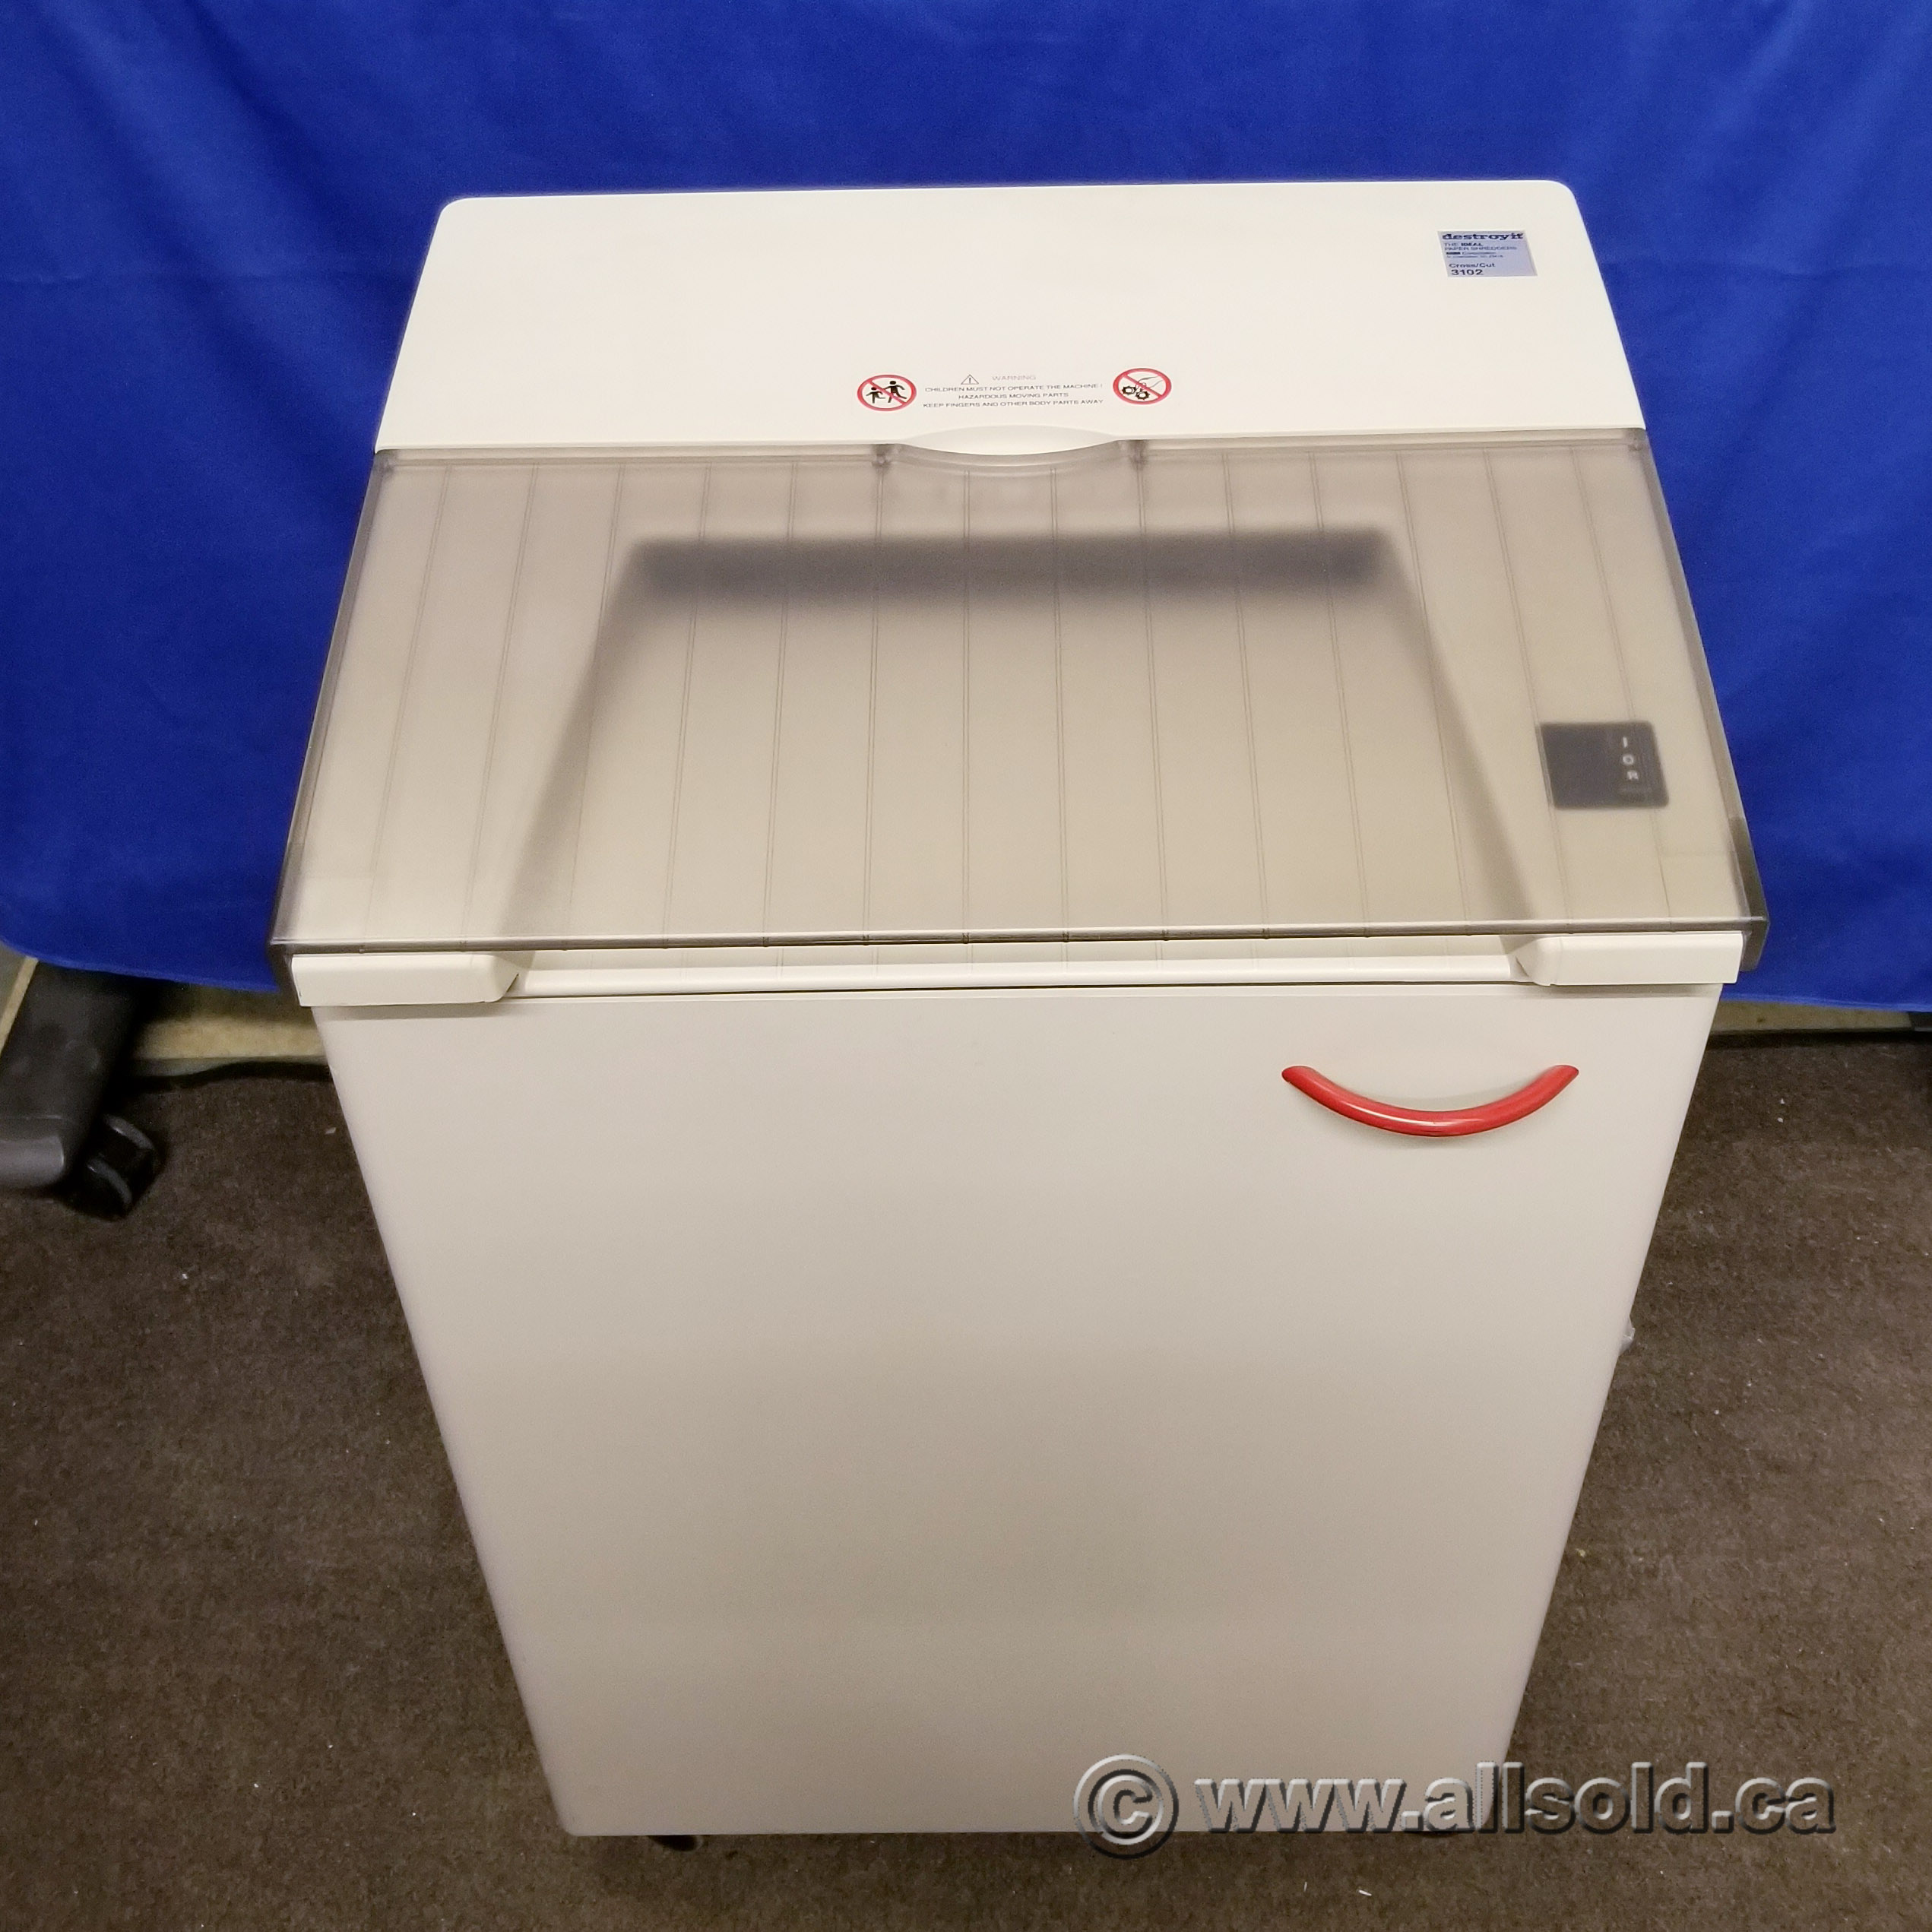 7 Things To Consider Before Buying A Paper Shredder Machine – Destroyit  Paper Shredders